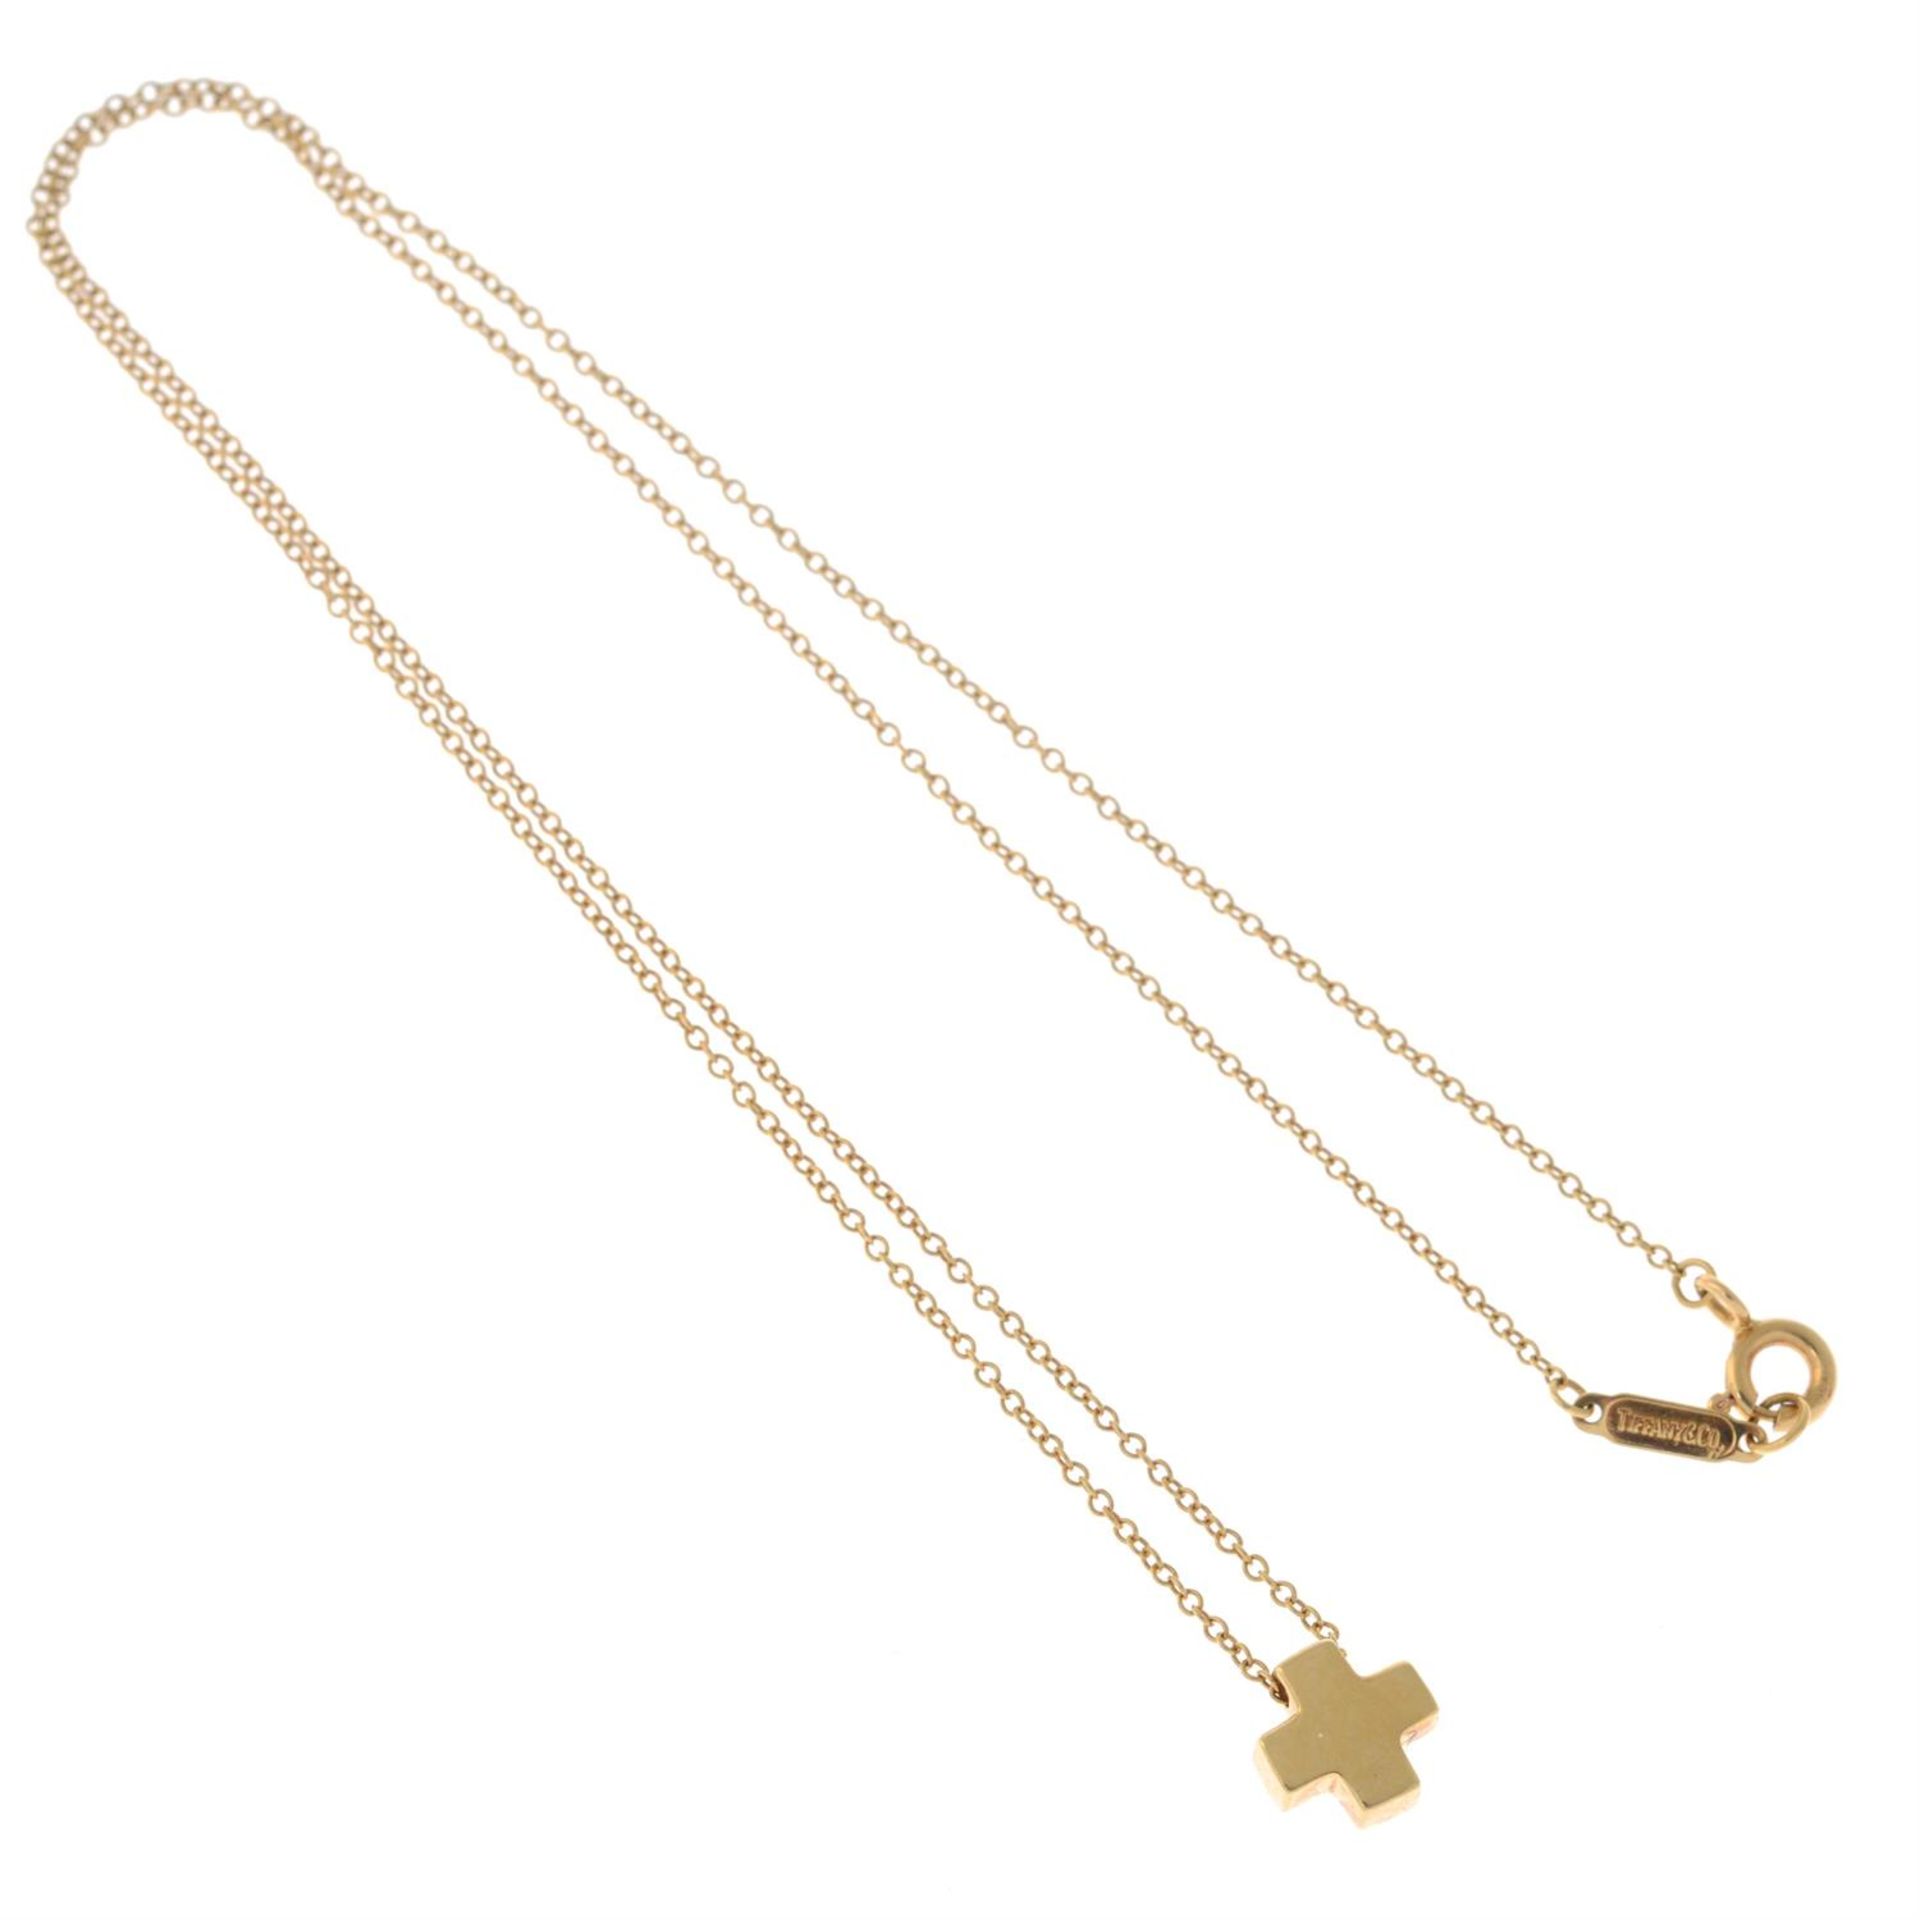 A cross pendant, with chain, by Tiffany & Co. - Image 2 of 3